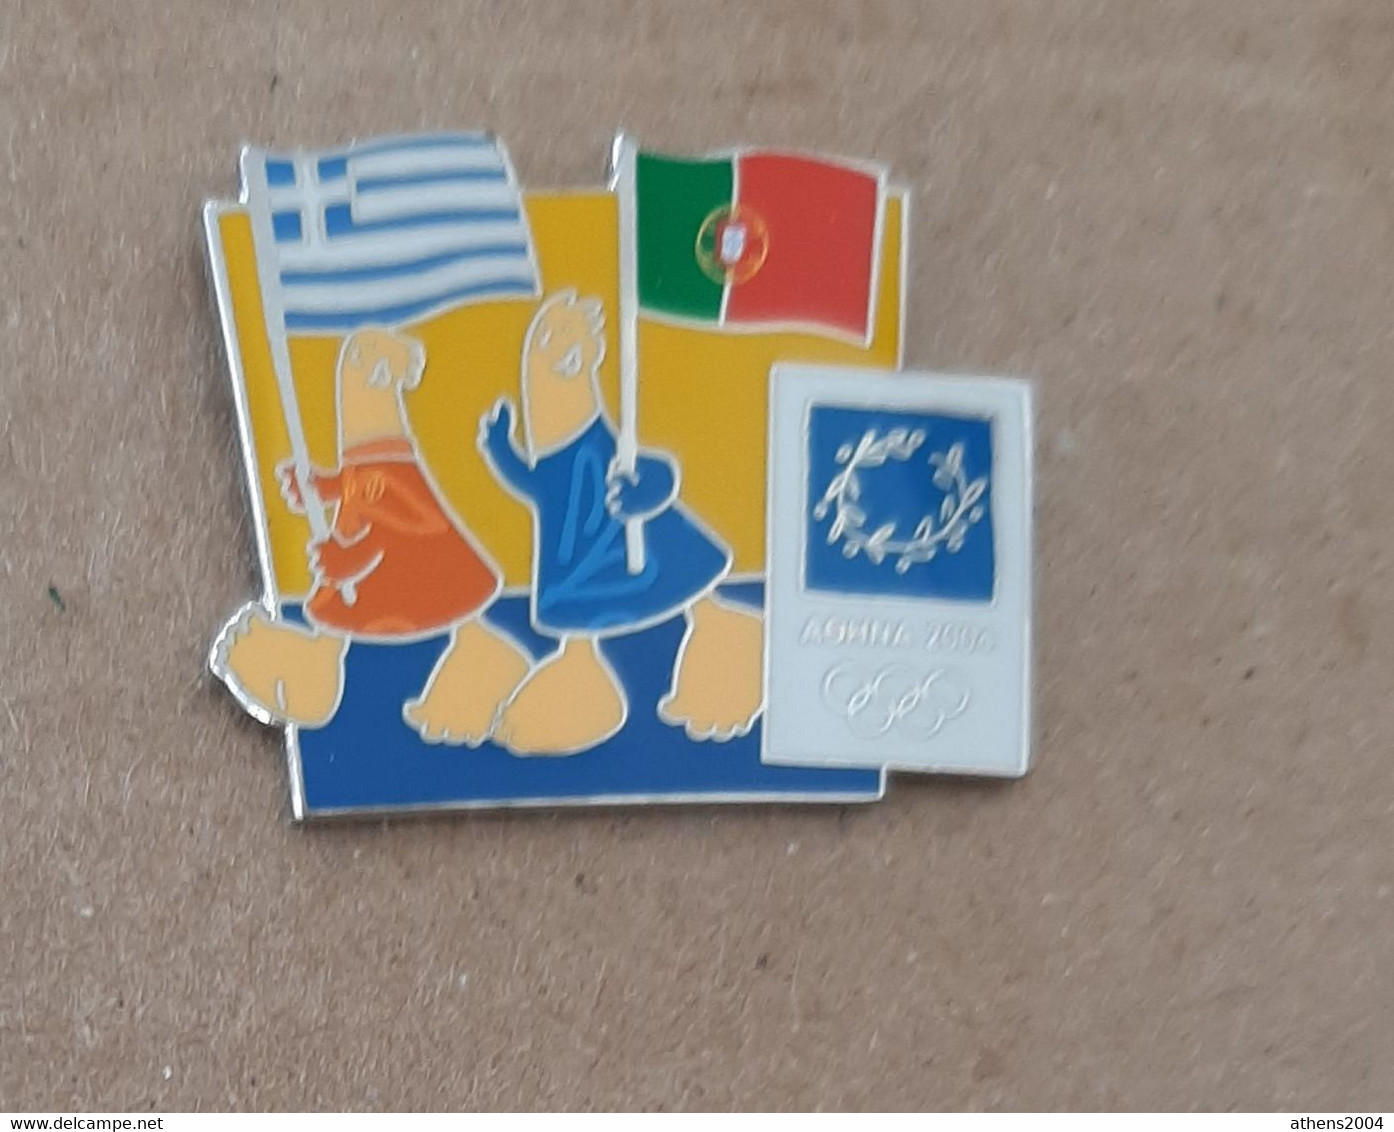 Athens 2004 Olympic Games - Mascots With E.U. Flags, Greece - Portugal Flags Pin - Jeux Olympiques